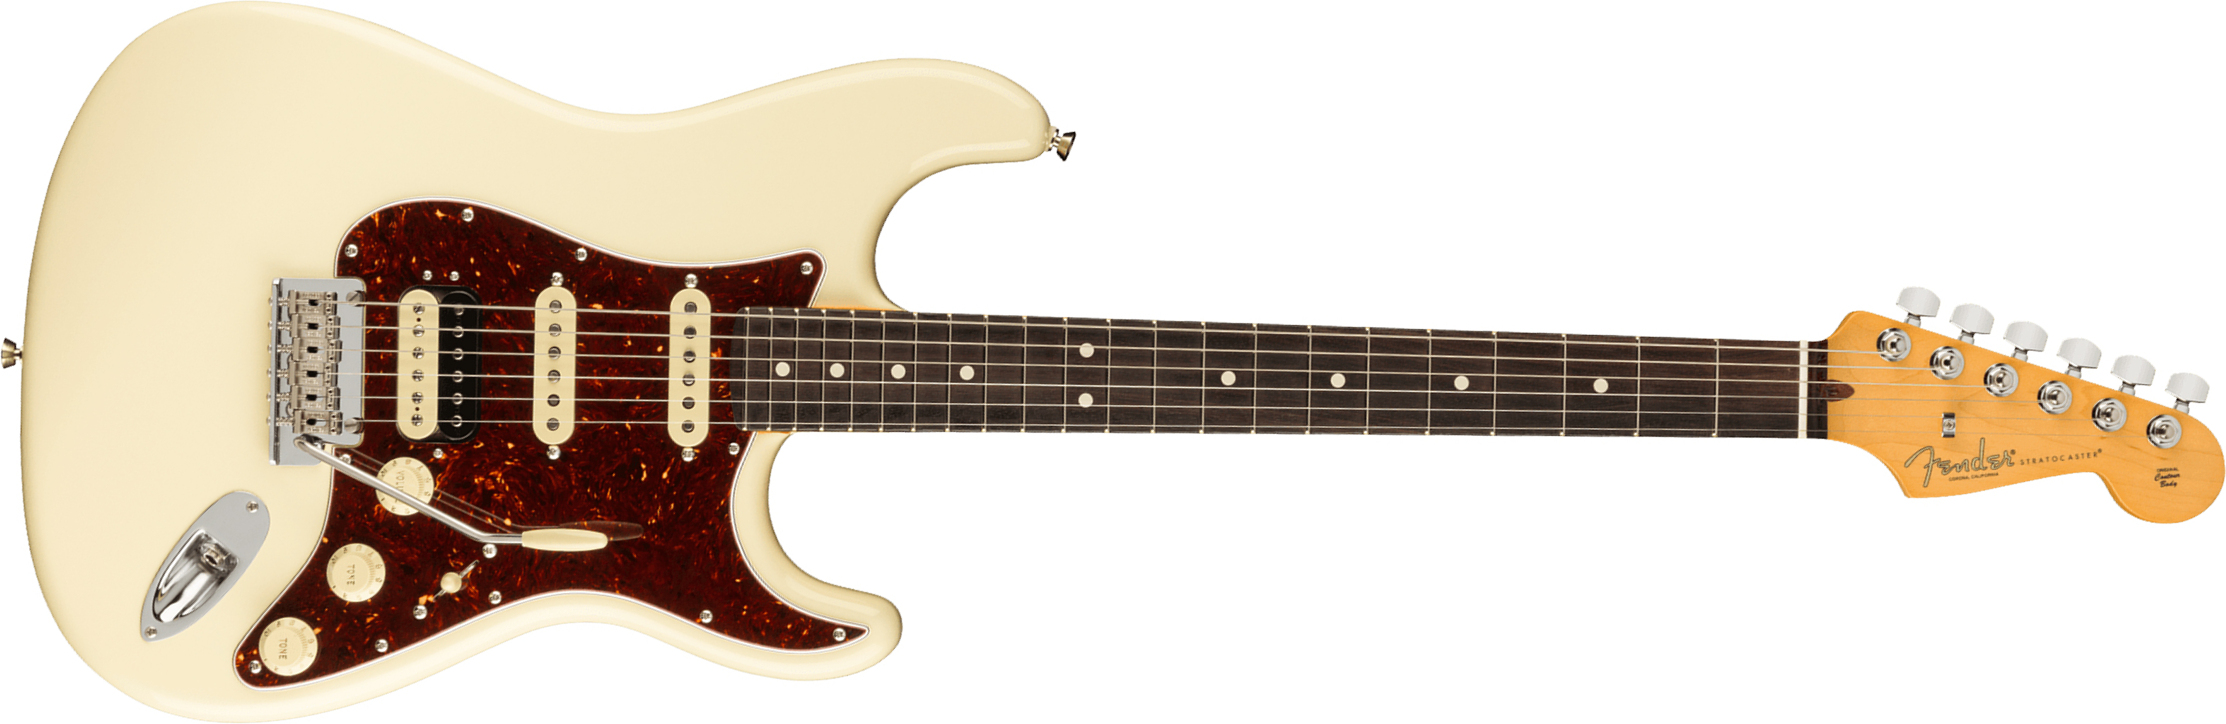 Fender Strat American Professional Ii Hss Usa Rw - Olympic White - Guitare Électrique Forme Str - Main picture